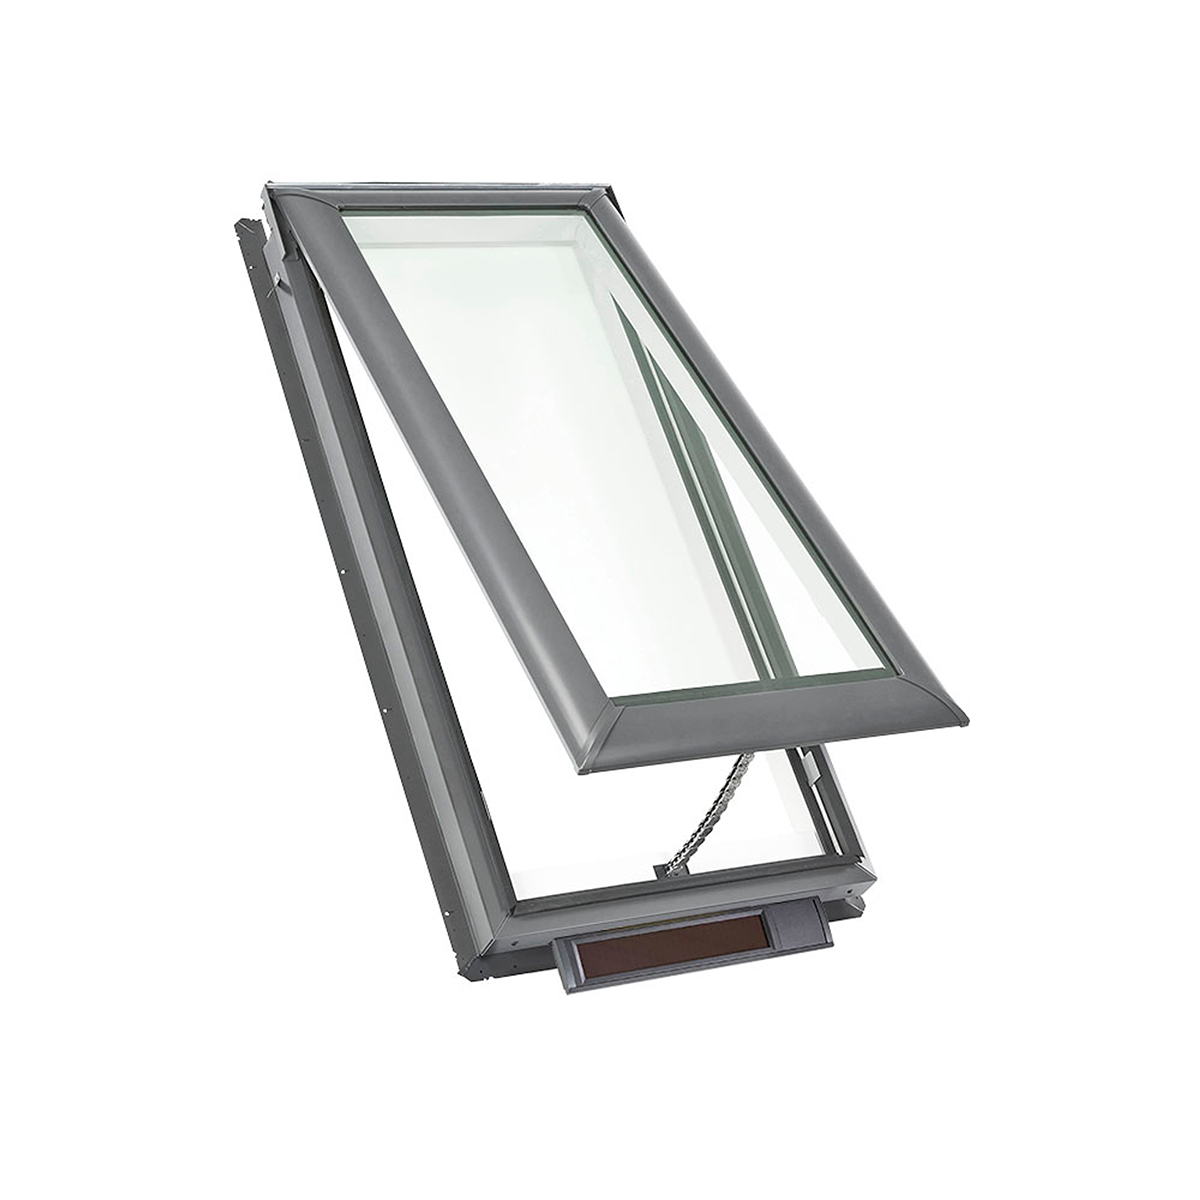 Solar Powered Deck-Mount Skylight with Laminated Low-E3 Glass - 21 in. x 37-7/8 in. - VSS C04